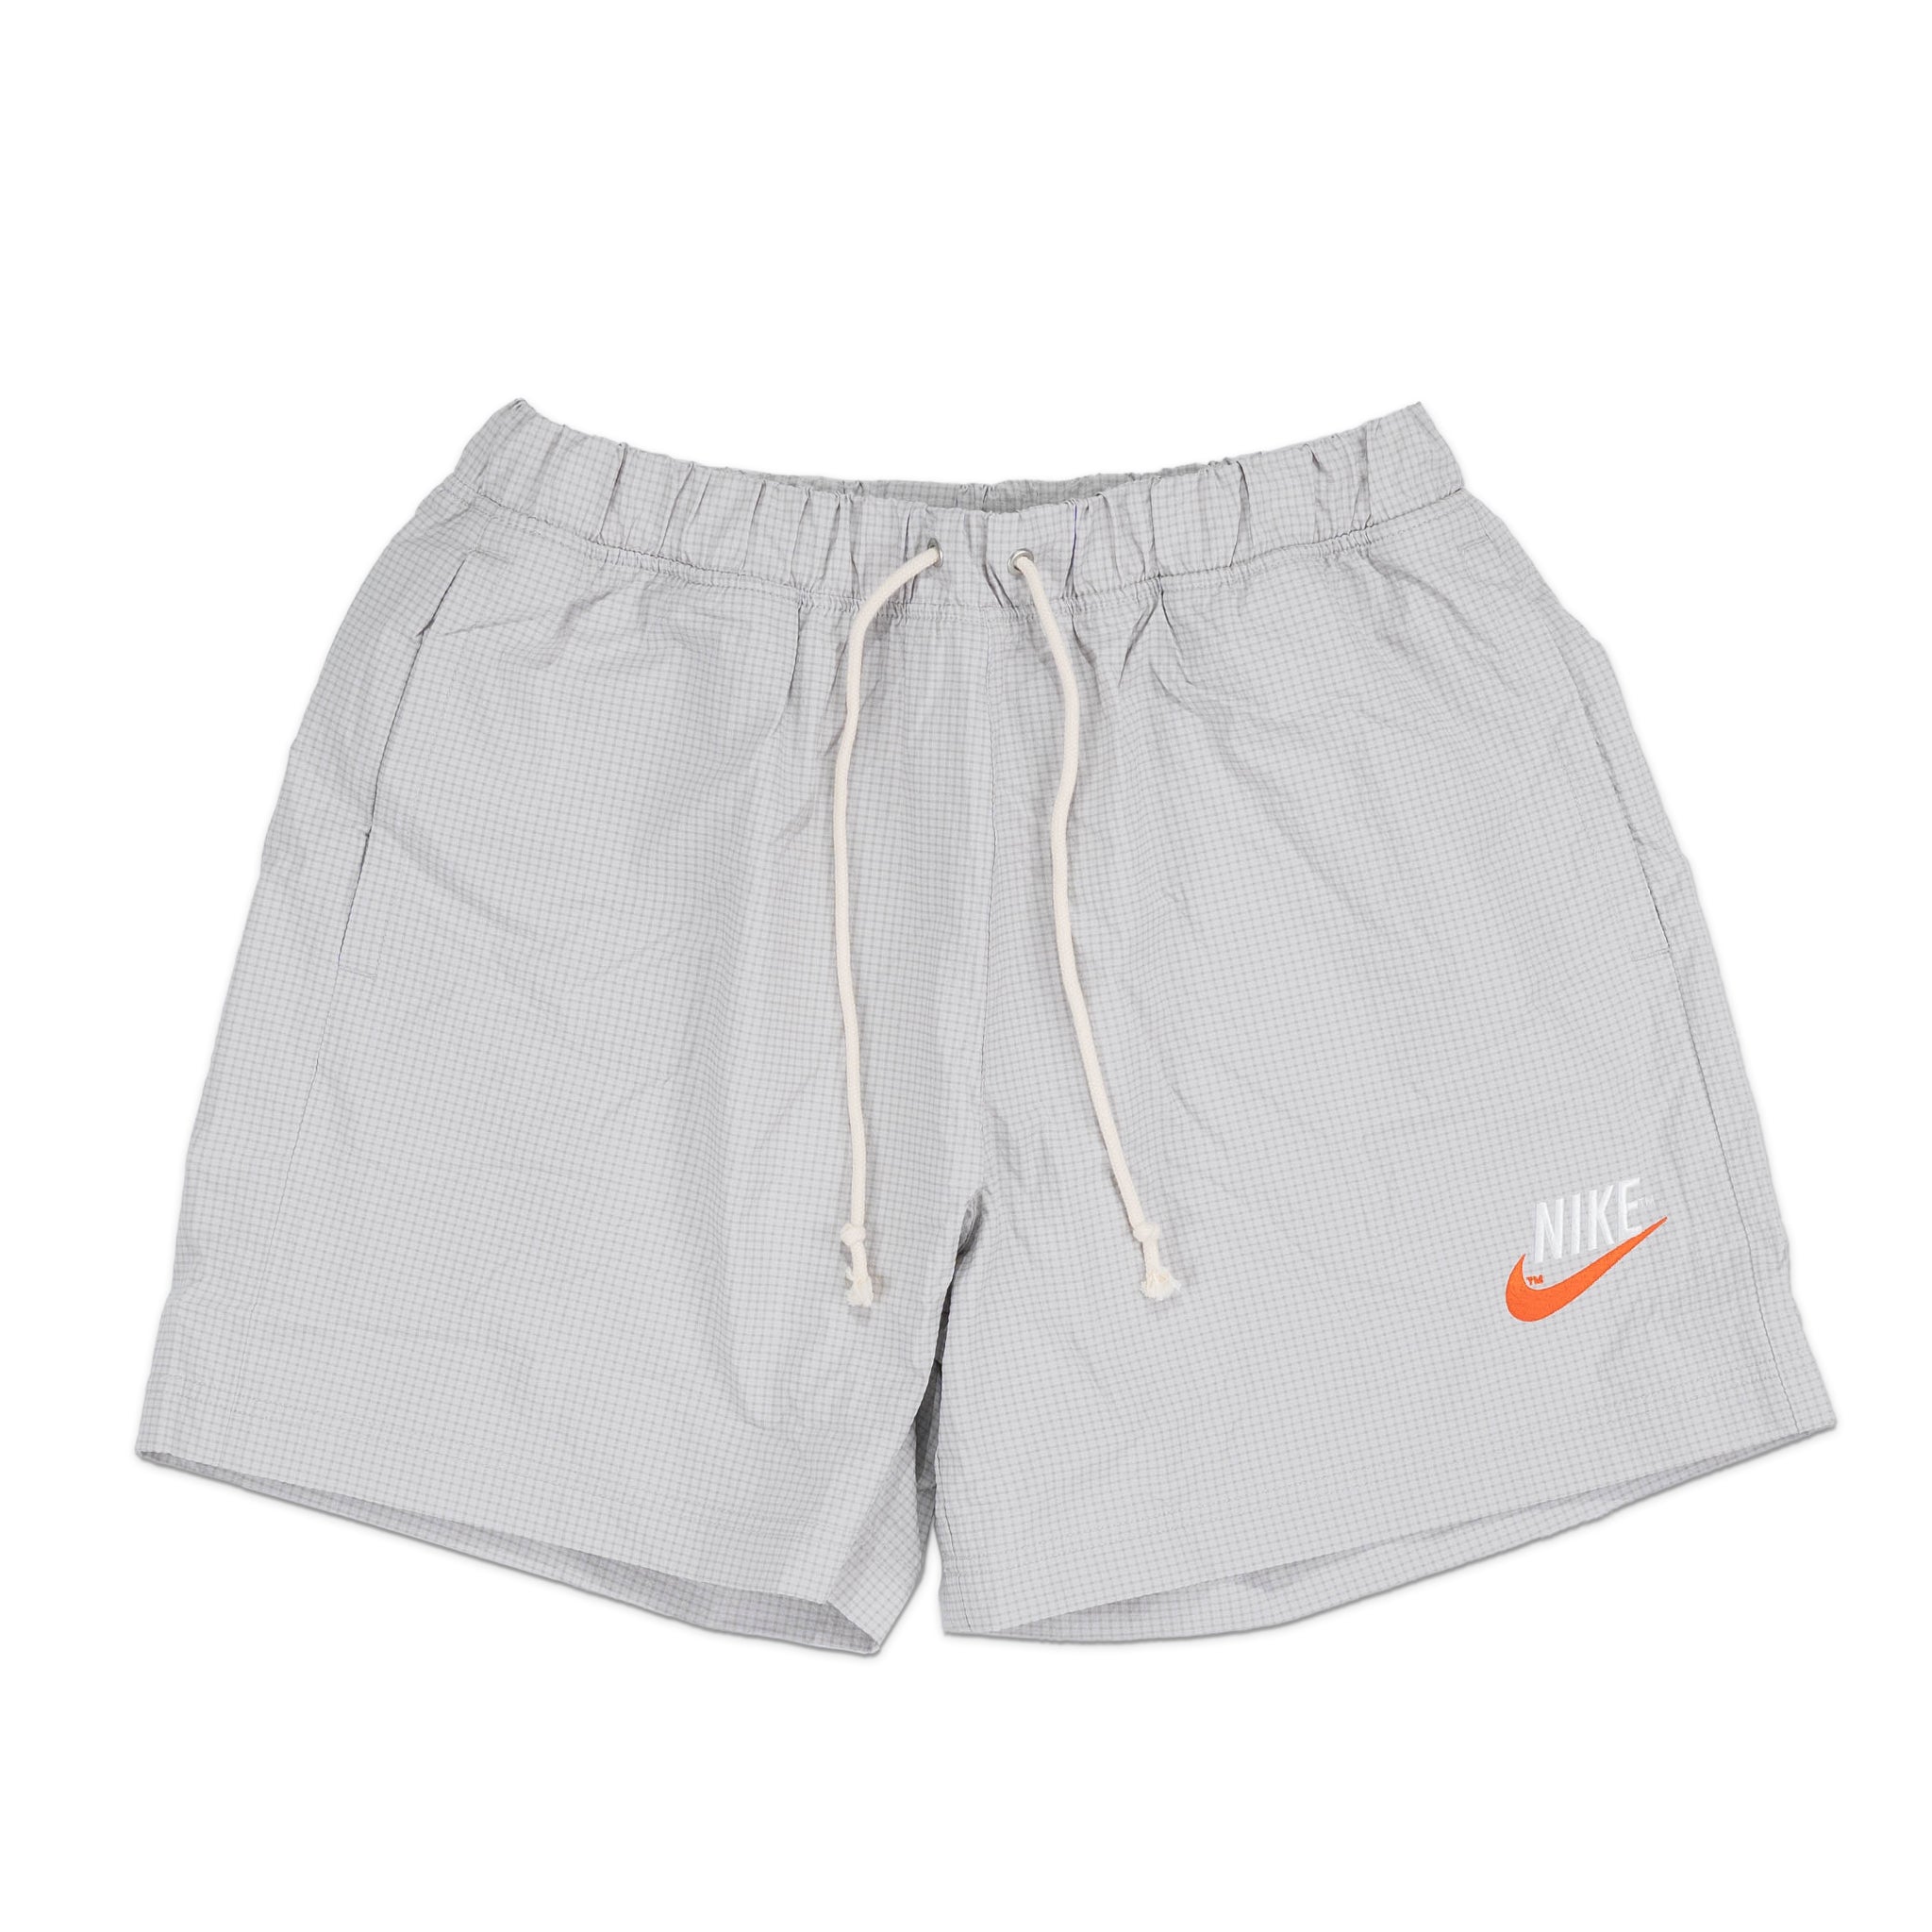 NSW Lined Woven Shorts DM5281-012 Grey